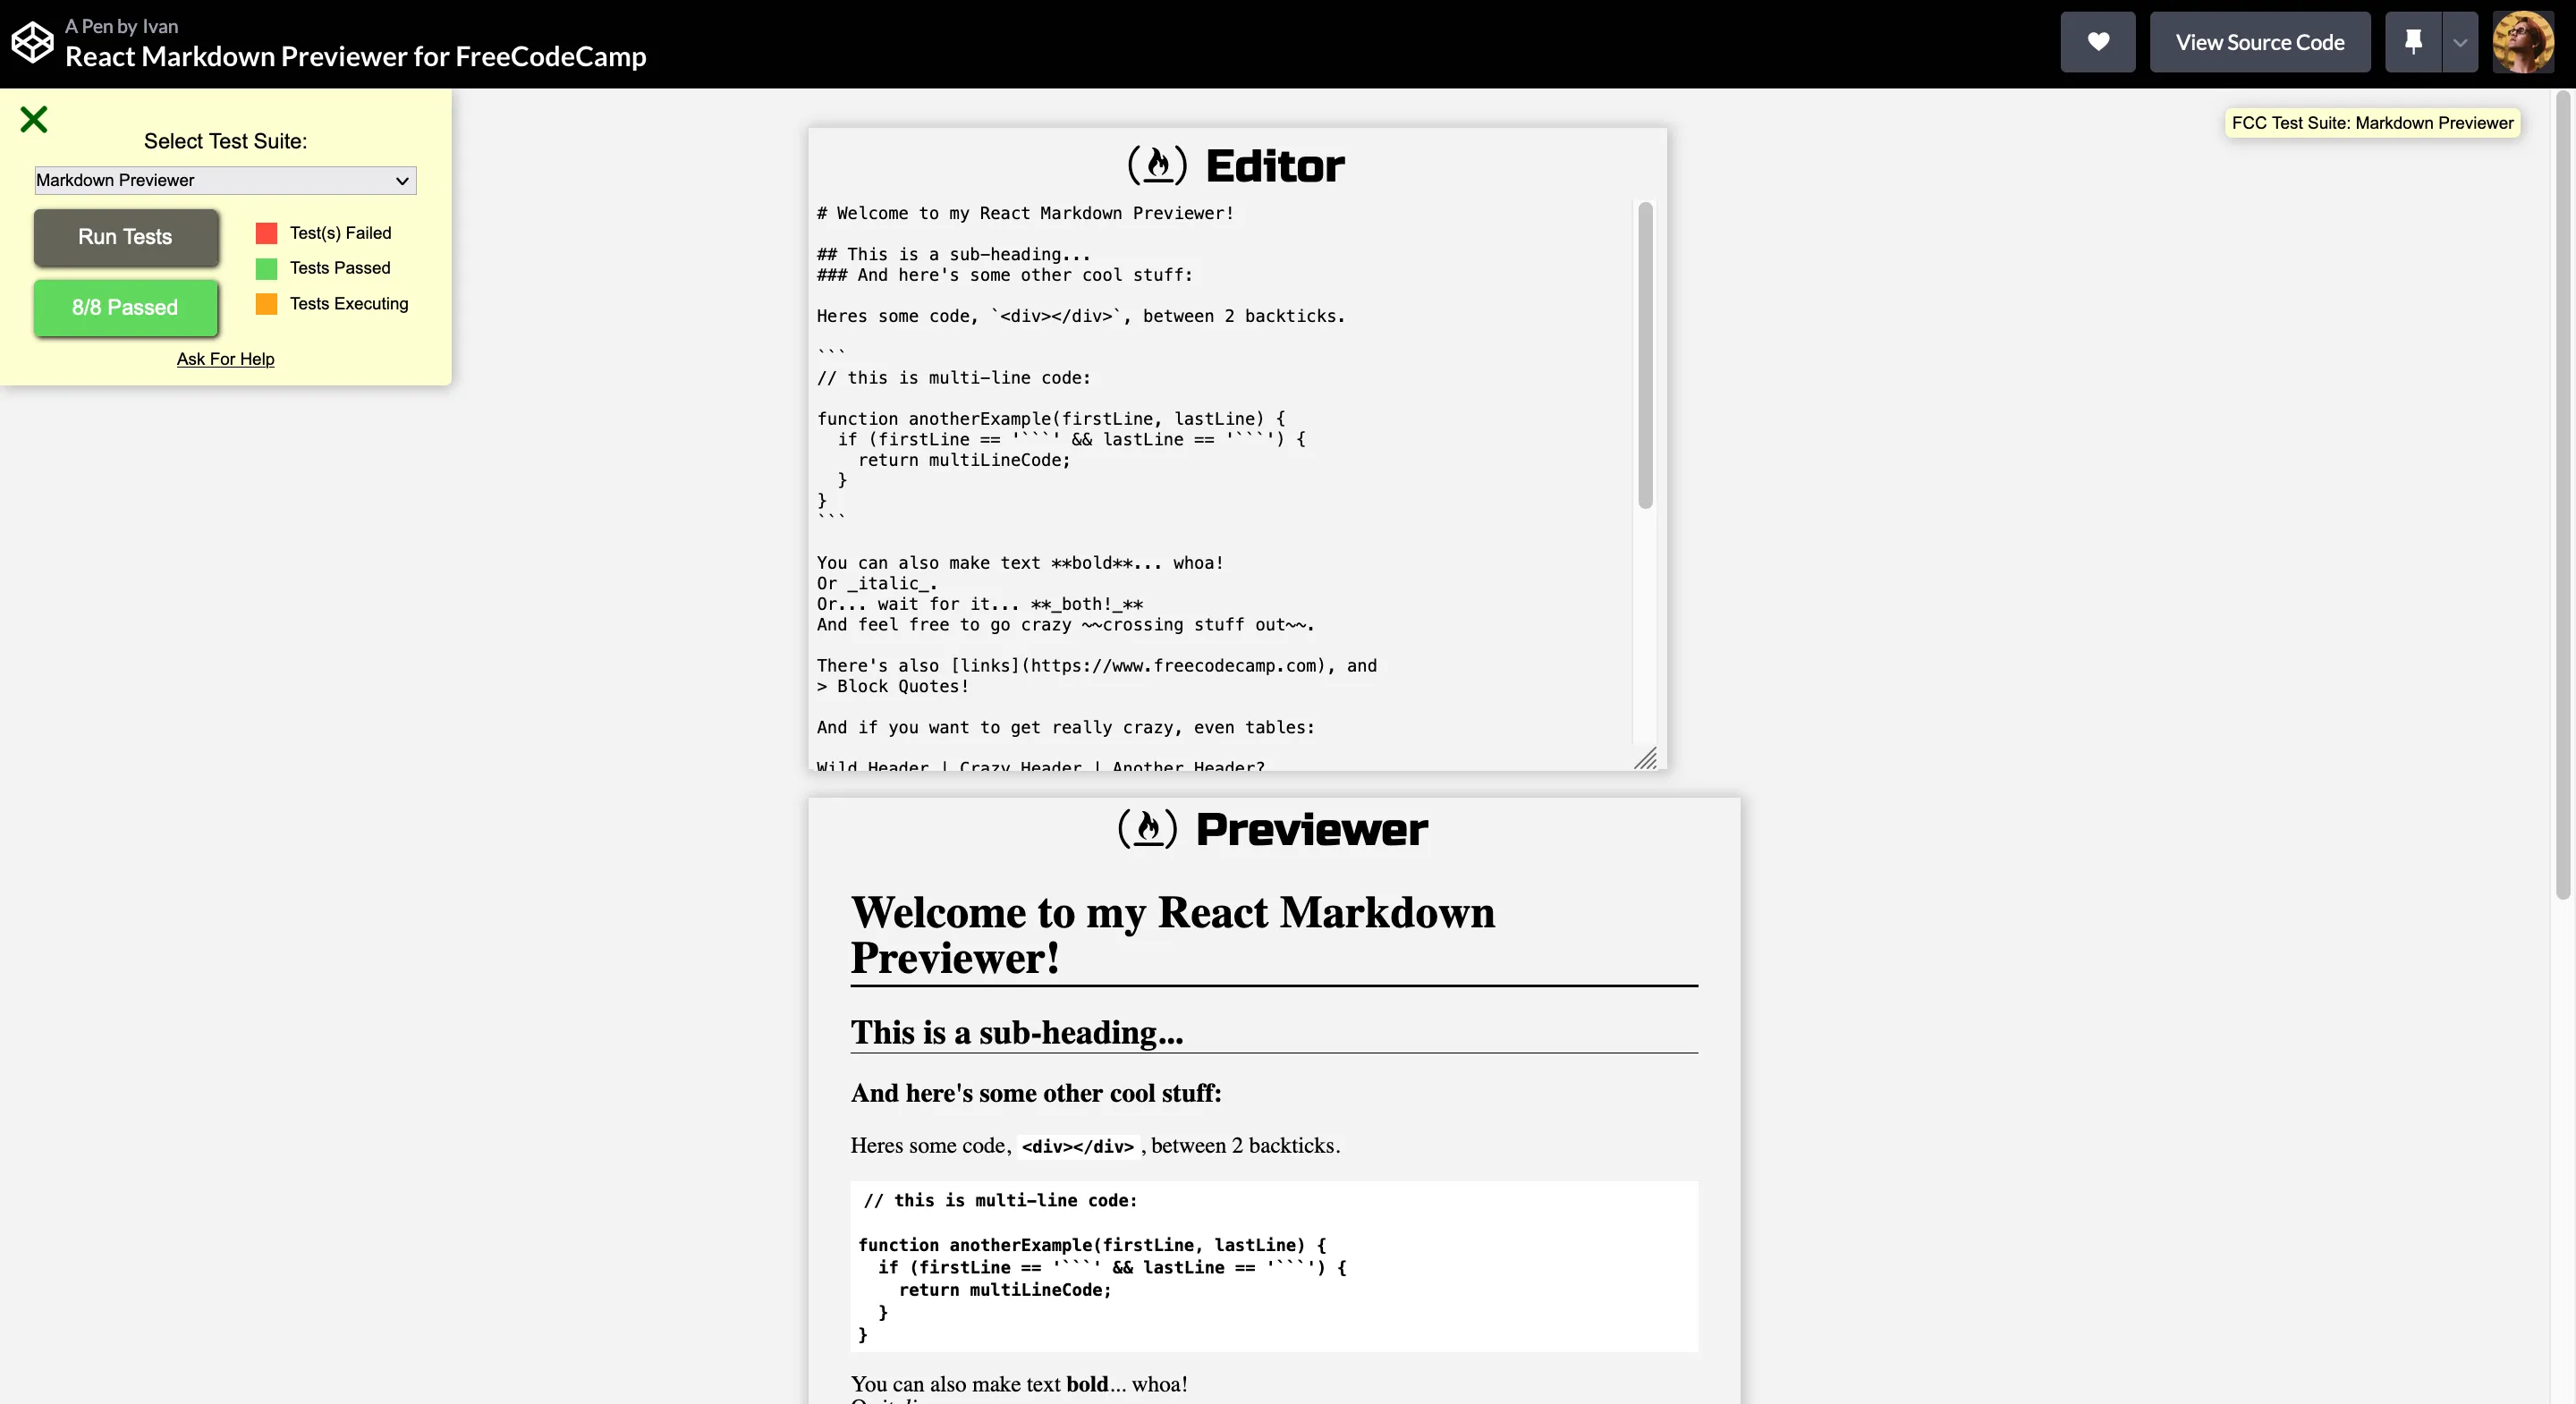 React Markdown Previewer for FreeCodeCamp